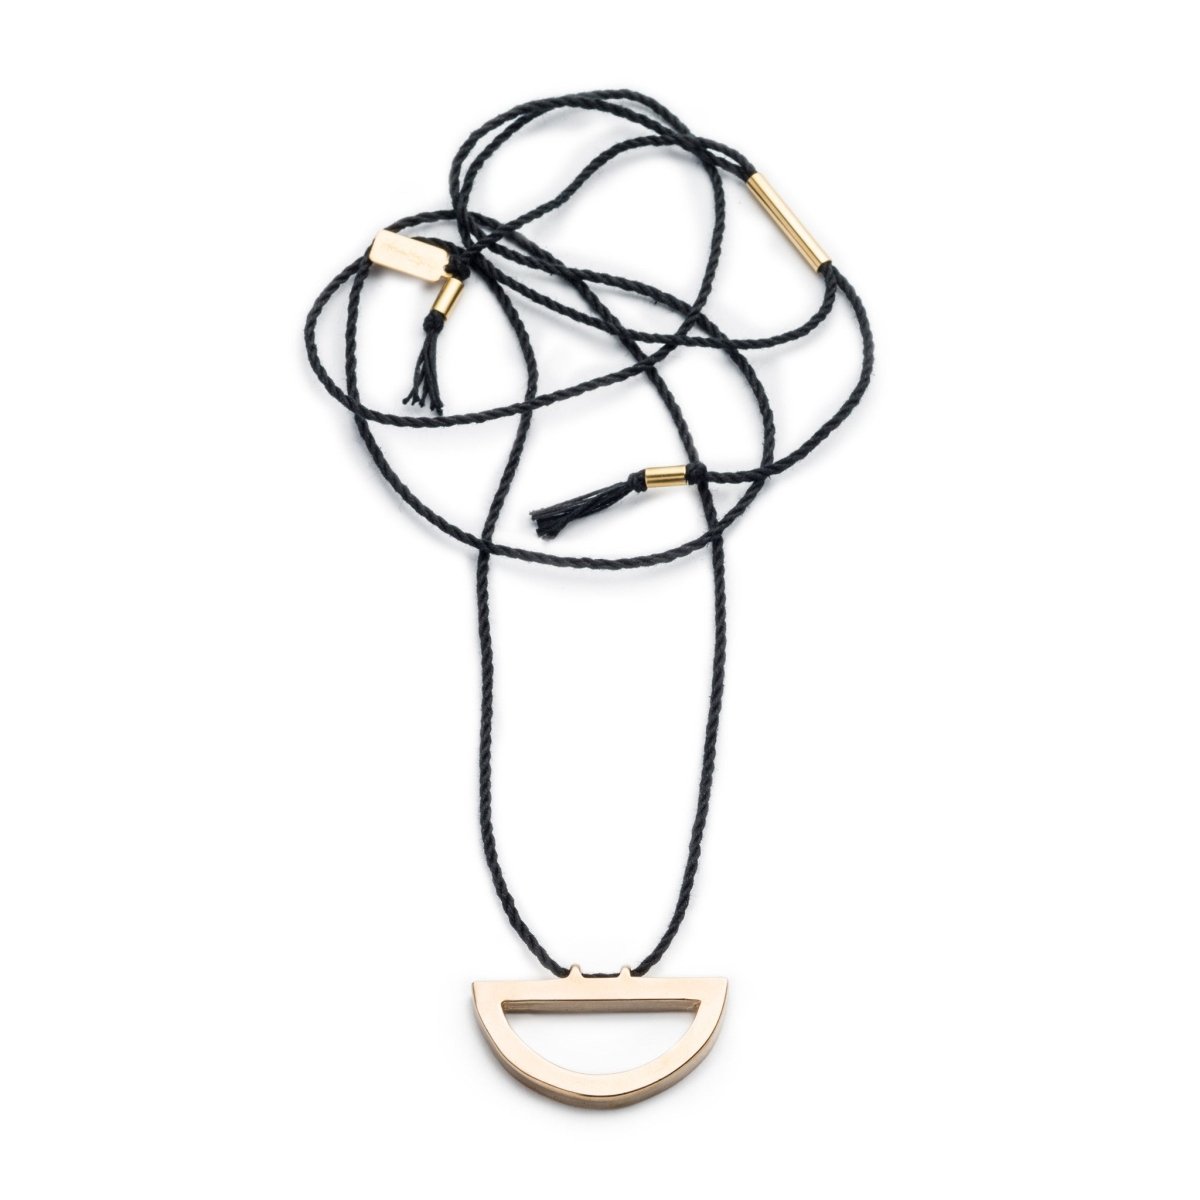 Modern, adjustable necklace of black Japanese cotton rope threaded along the long end of a cast bronze semi-circle pendant with brass tubing accents and black cotton fringe. Hand-crafted in Portland, Oregon. 